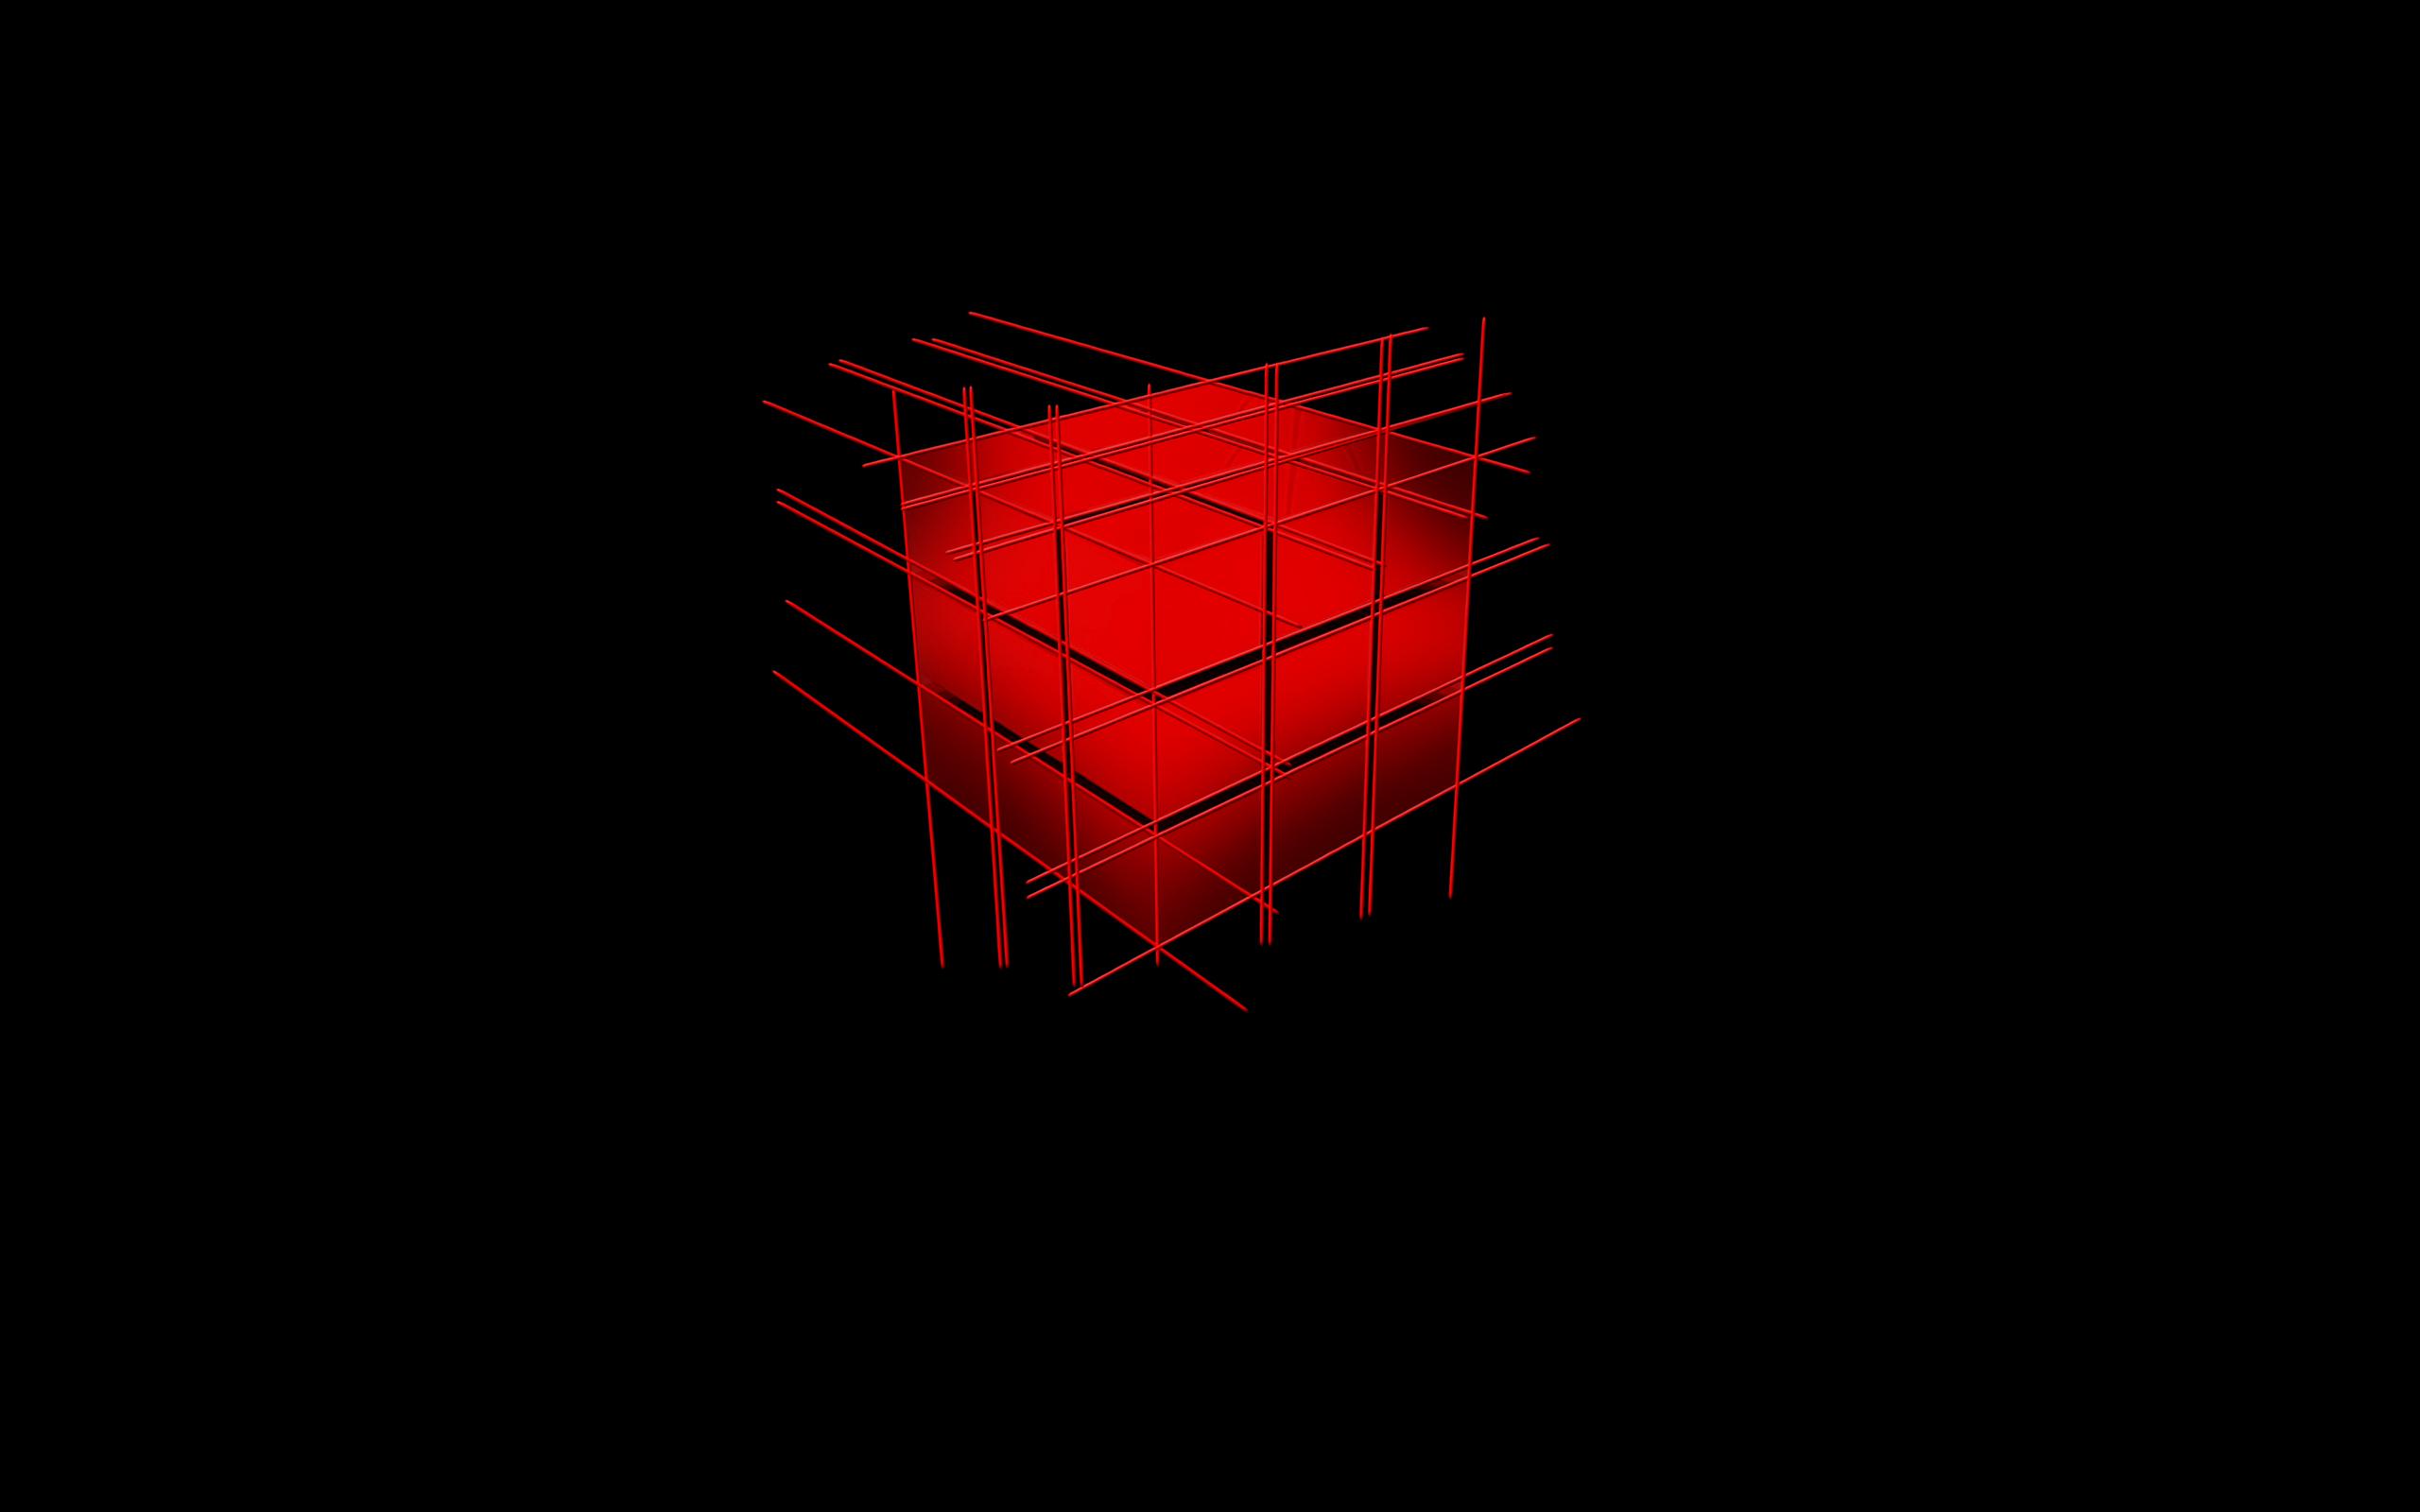 Free download red black cubes iphone wallpaper iphone 3g wallpaper